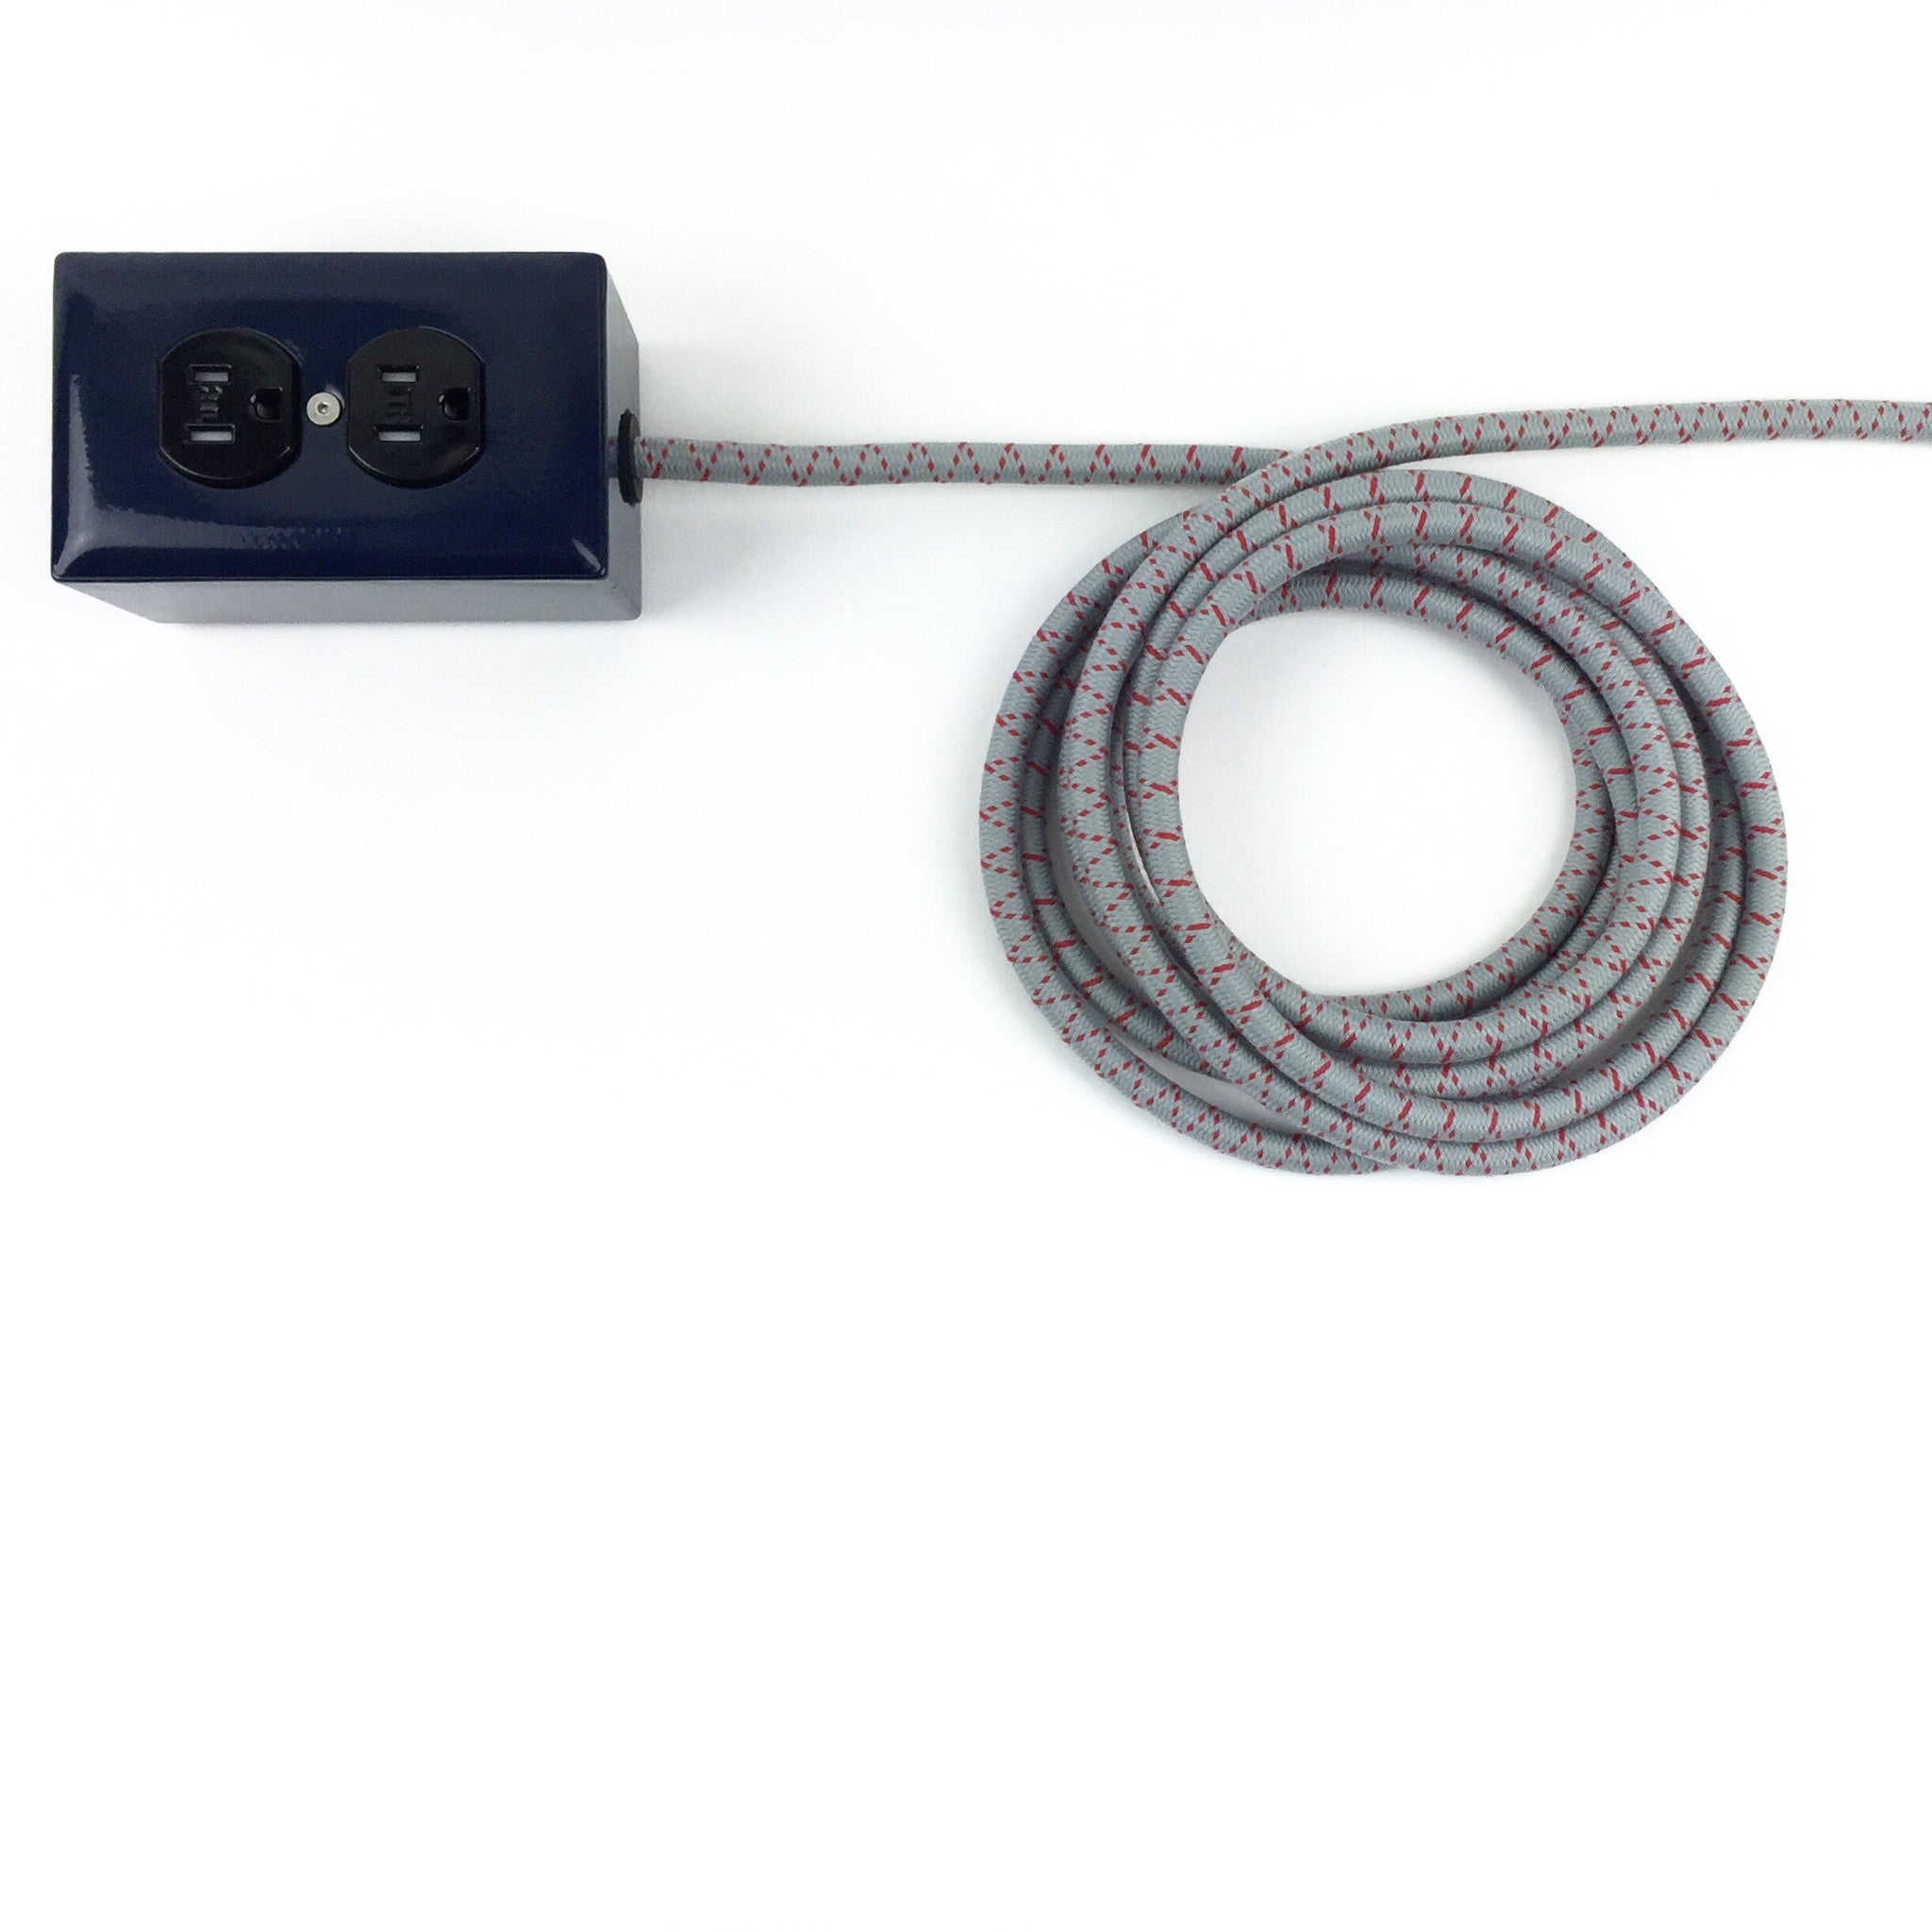 New! Navy Blue Extō - A Modern Dual-Tamper-Resistant Outlet, 15-AMP Extension Cord